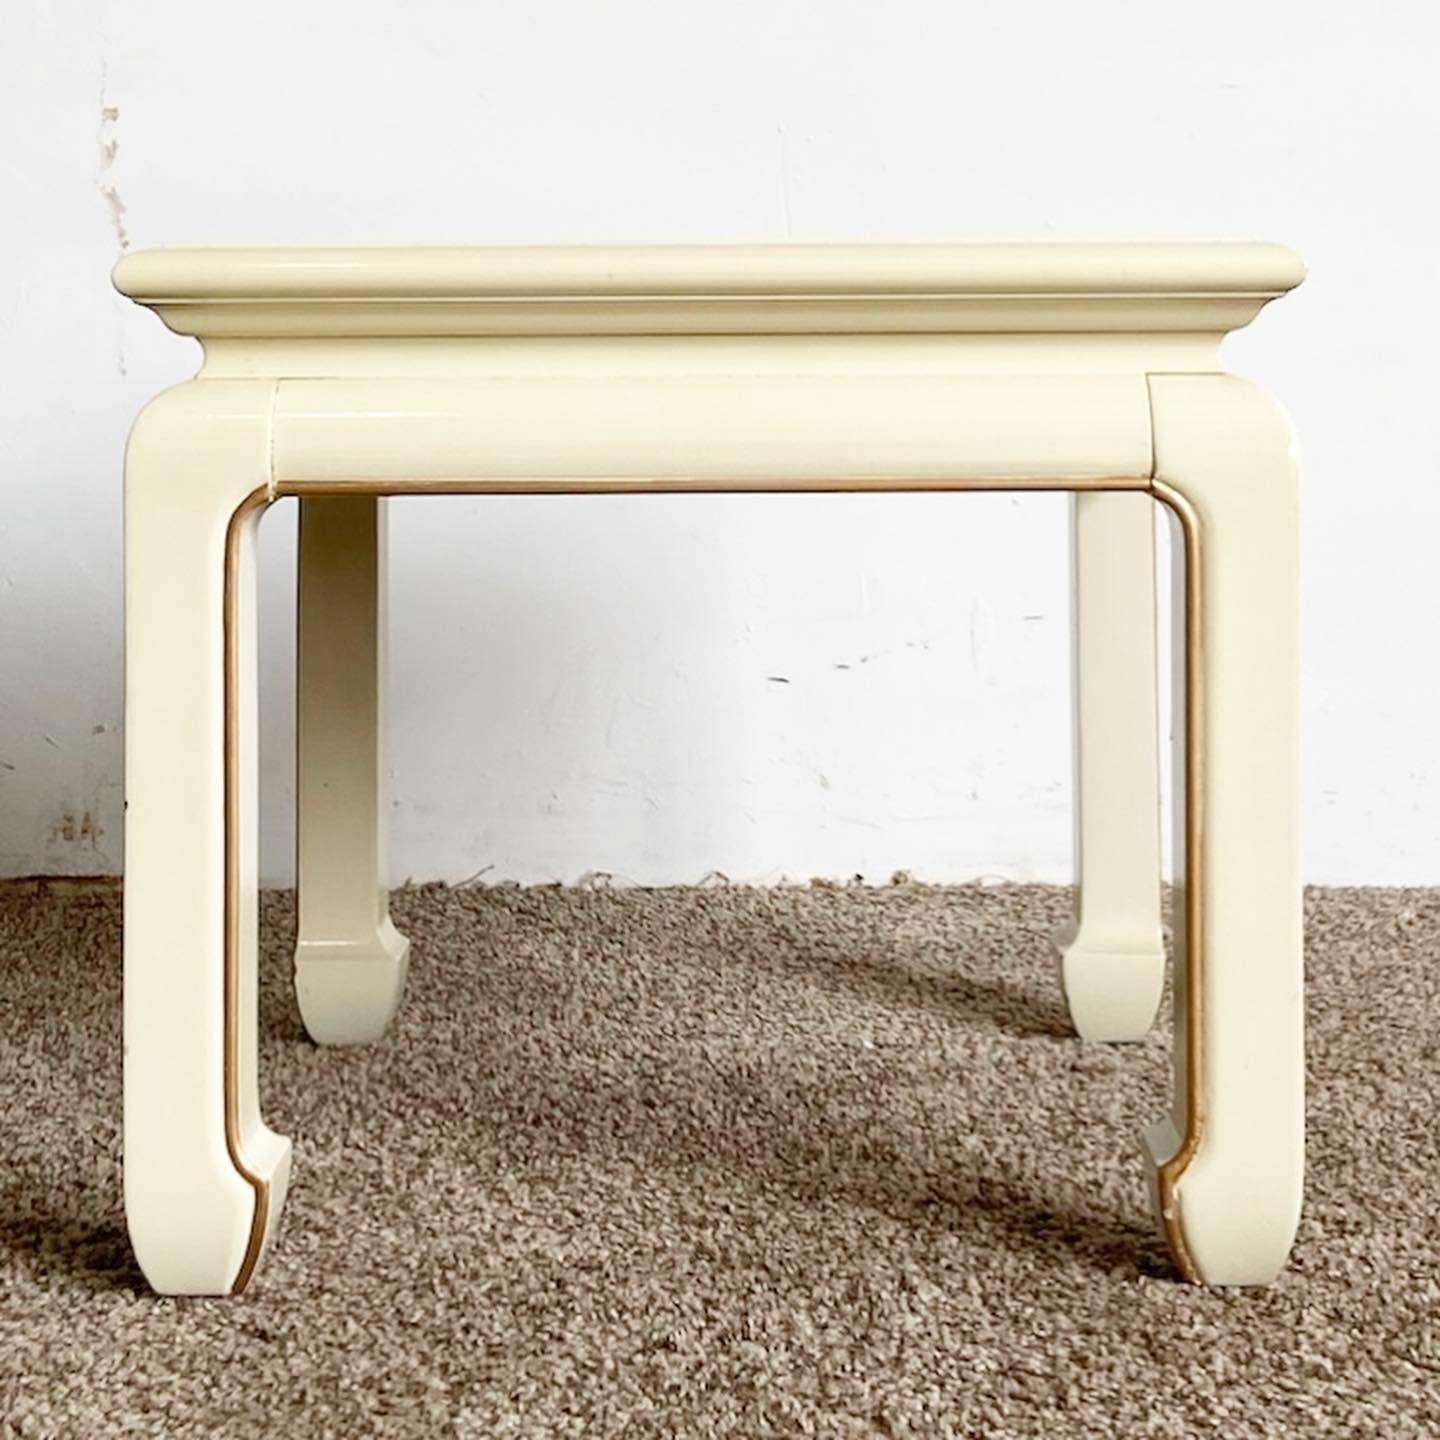 Exceptional vintage Chinese wooden square side table. Features a cream lacquered finish with hand painted gold and floral accents.
